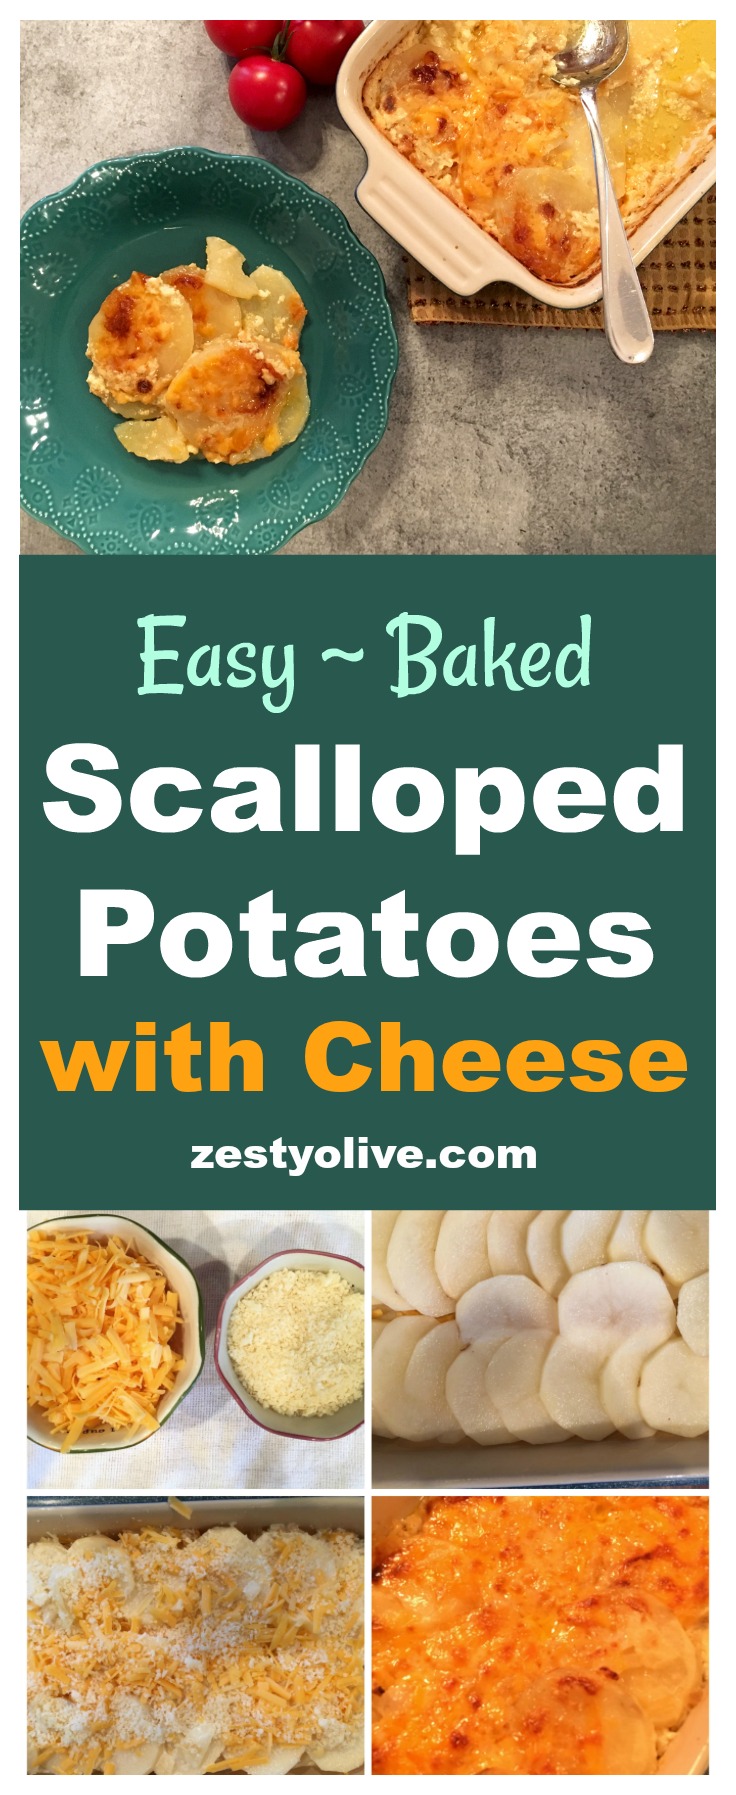 If you love potatoes and love cheese, then these baked scalloped potatoes with cheese will rock your world. They are so easy to make, and if you have leftovers, they are even better the next day. It's true!